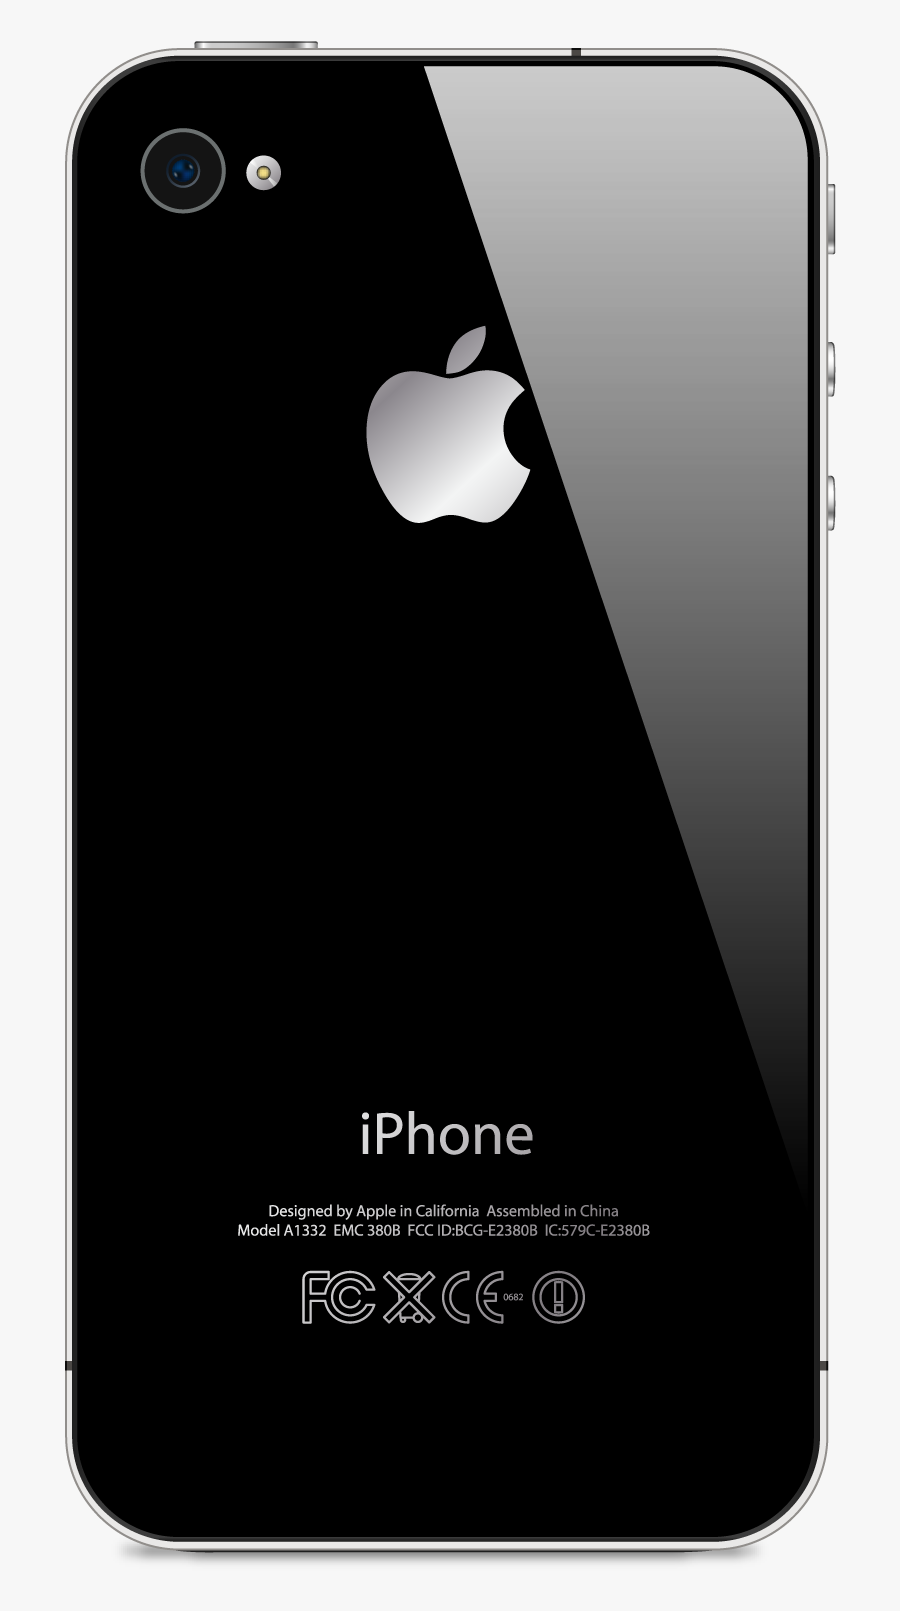 Iphone Apple Png Images - Iphone Back Photo Download, Transparent Clipart